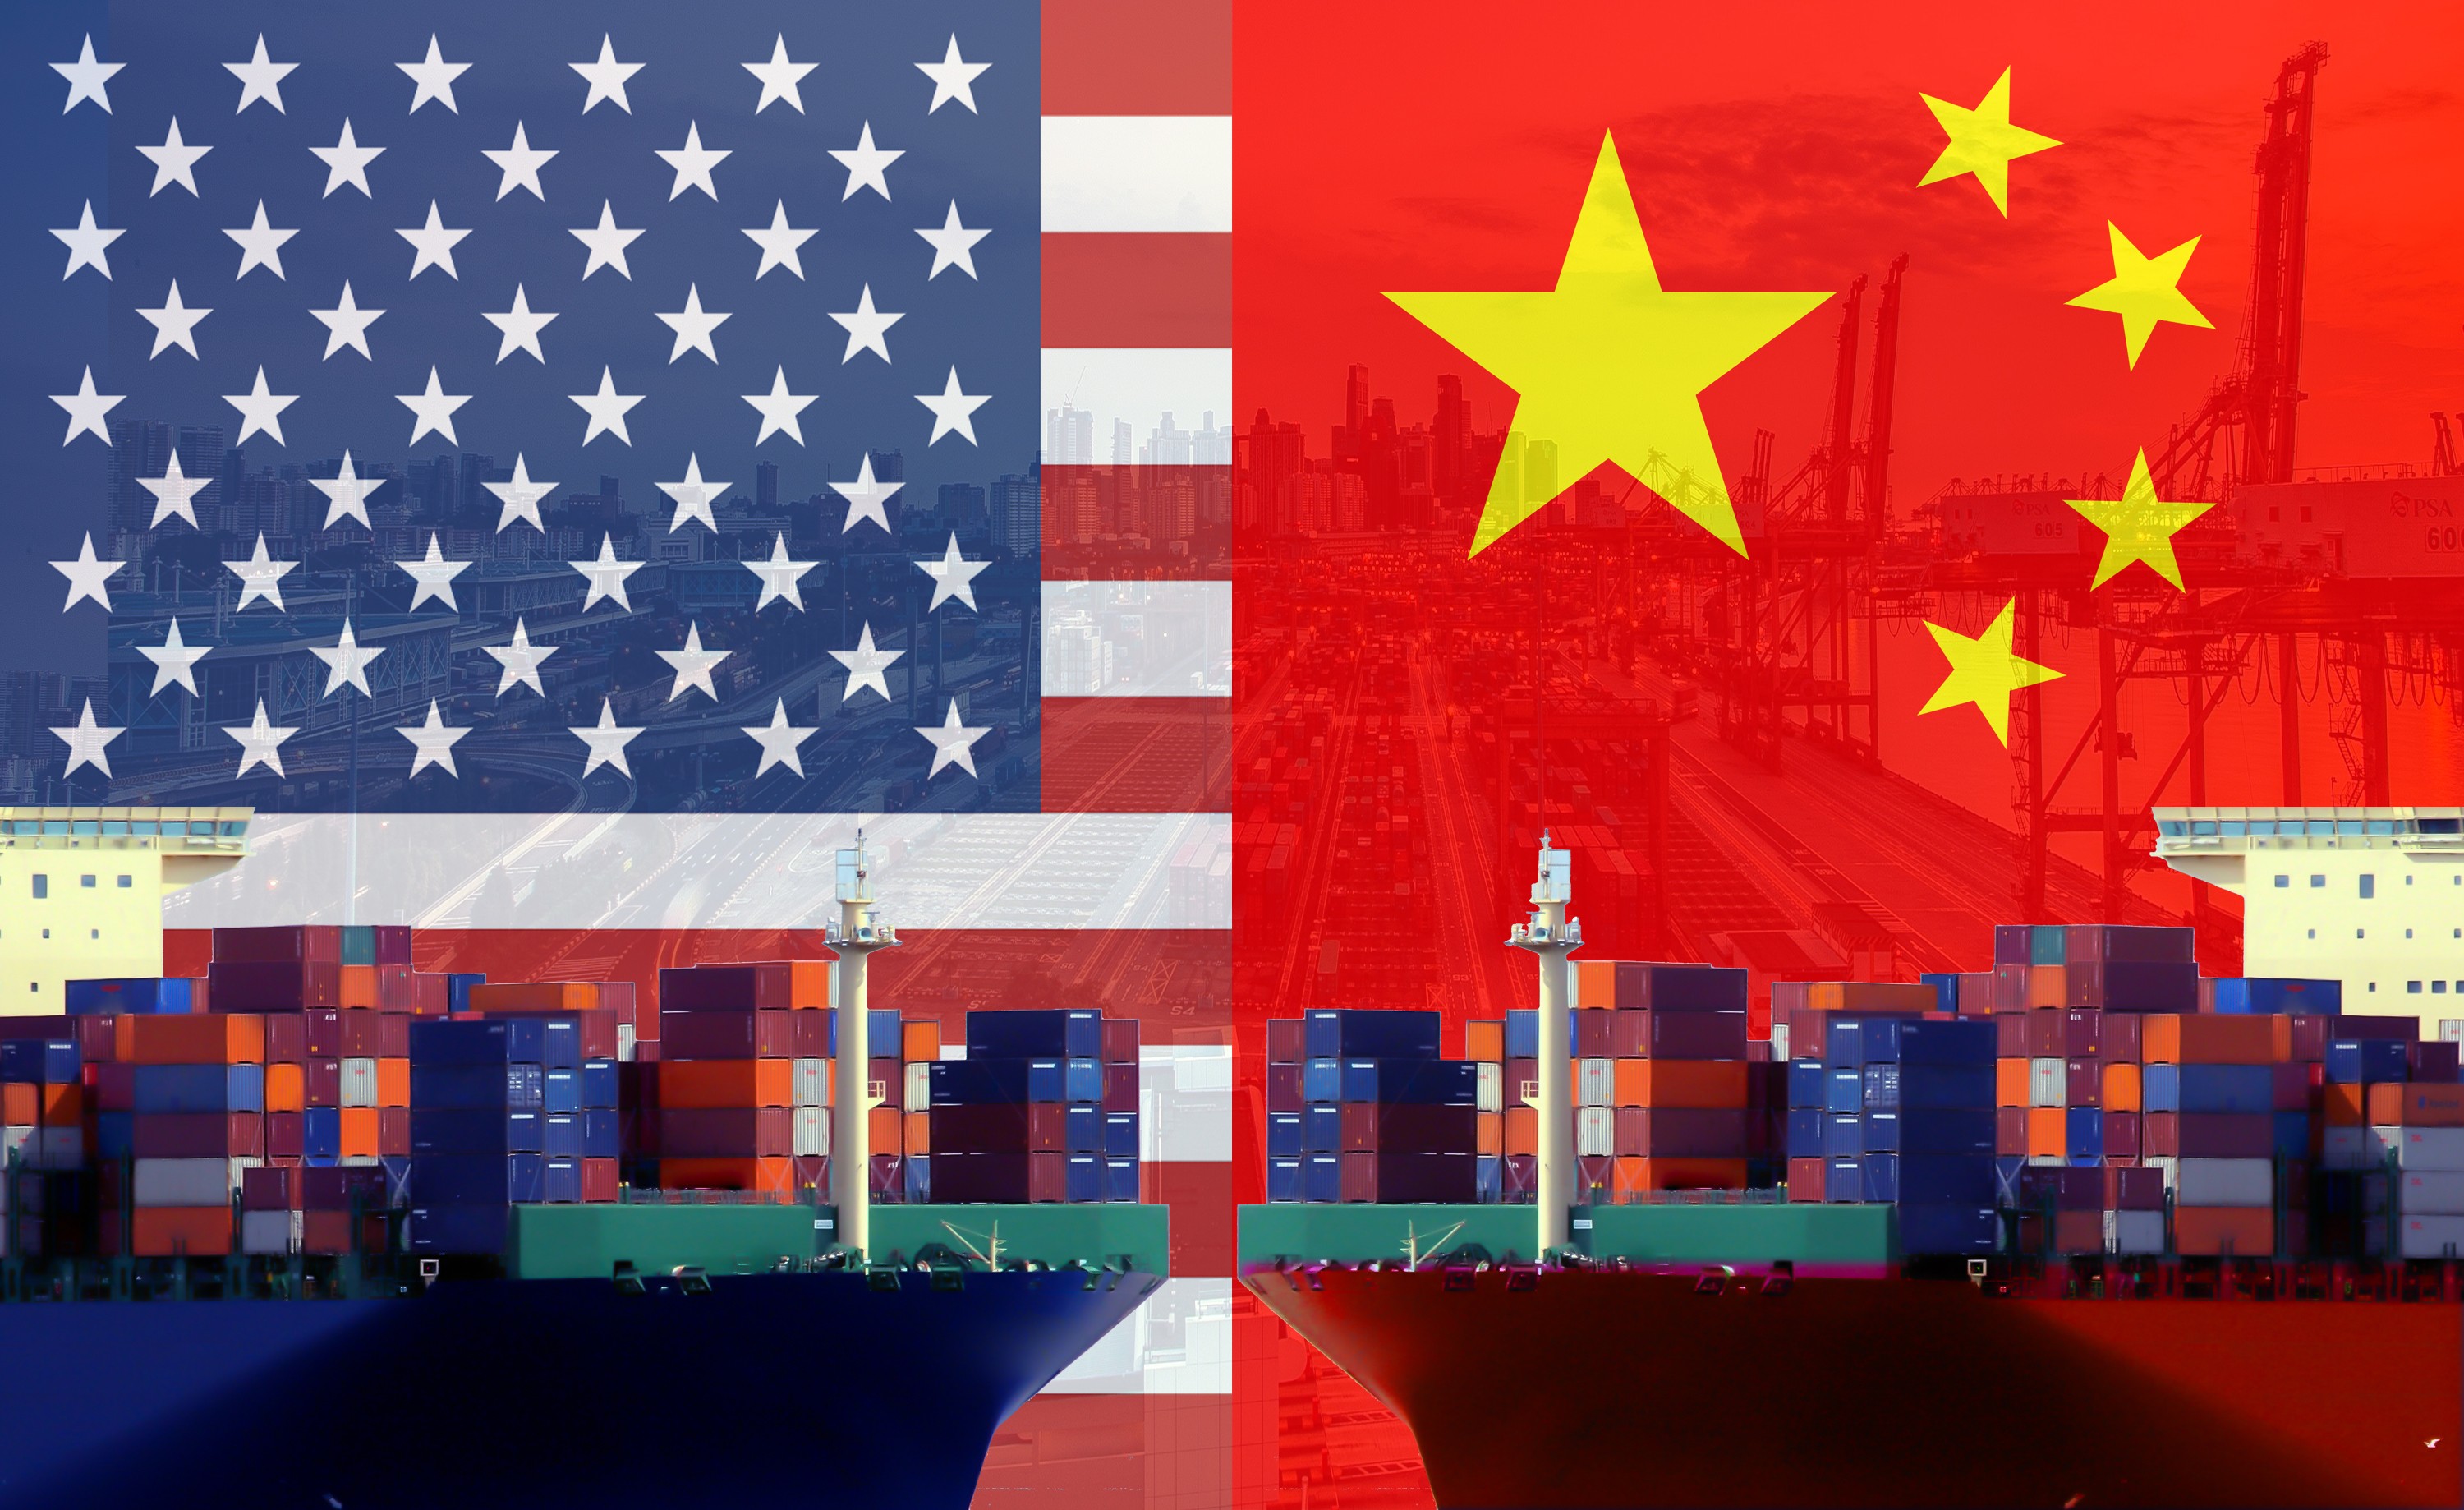 Critics claim that a lack of understanding of the US caused China to misread the situation in the run-up to the trade war. Photo: Shutterstock